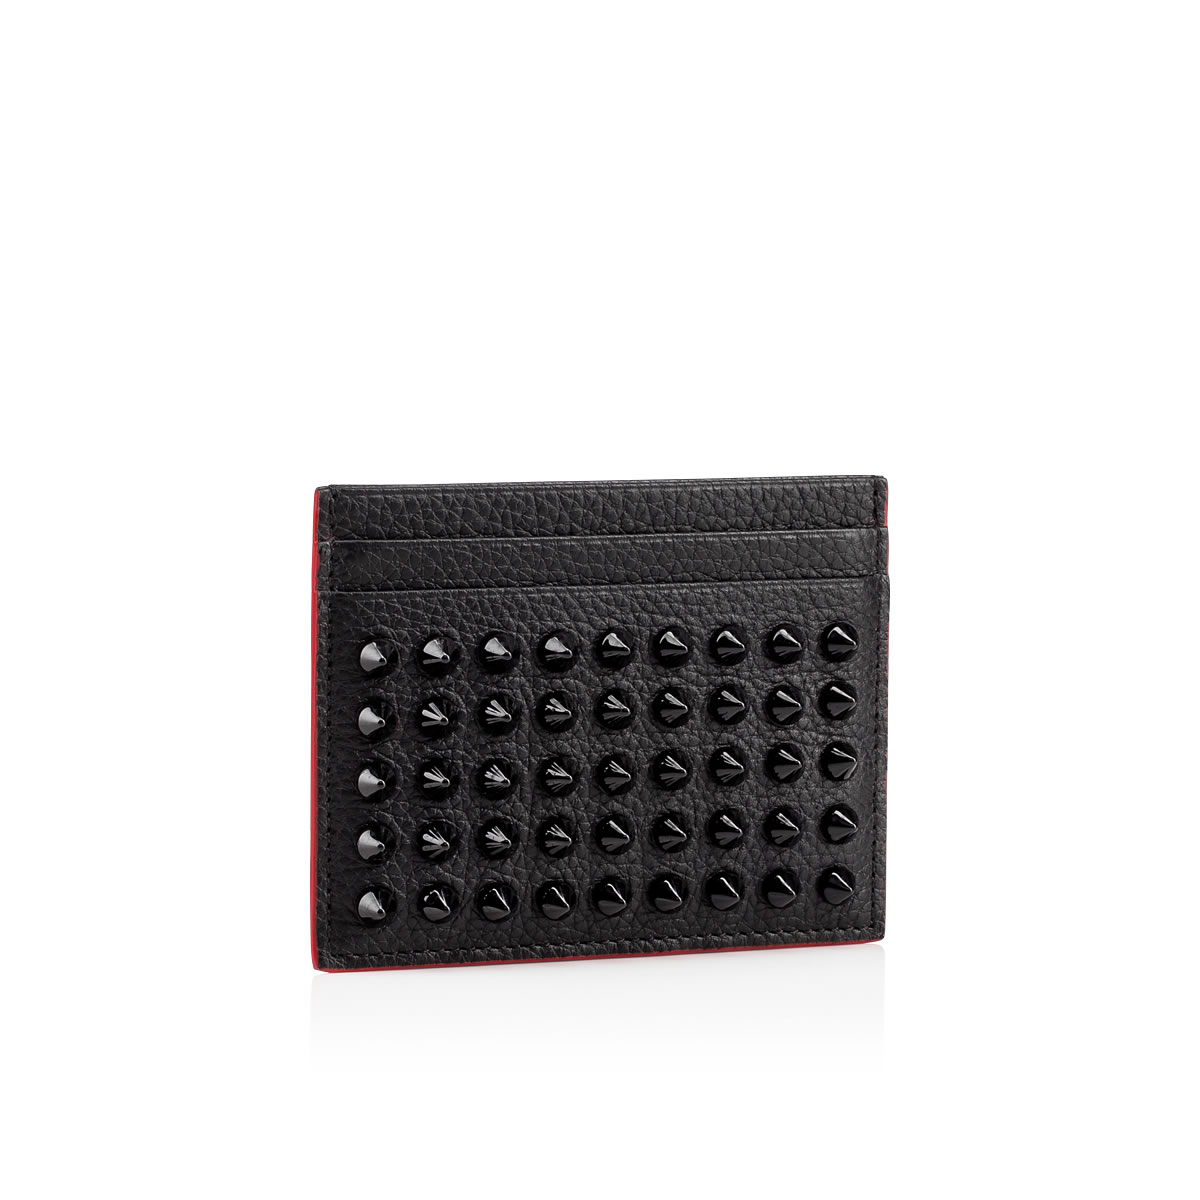 Kios Studded Leather Card Holder in Red - Christian Louboutin